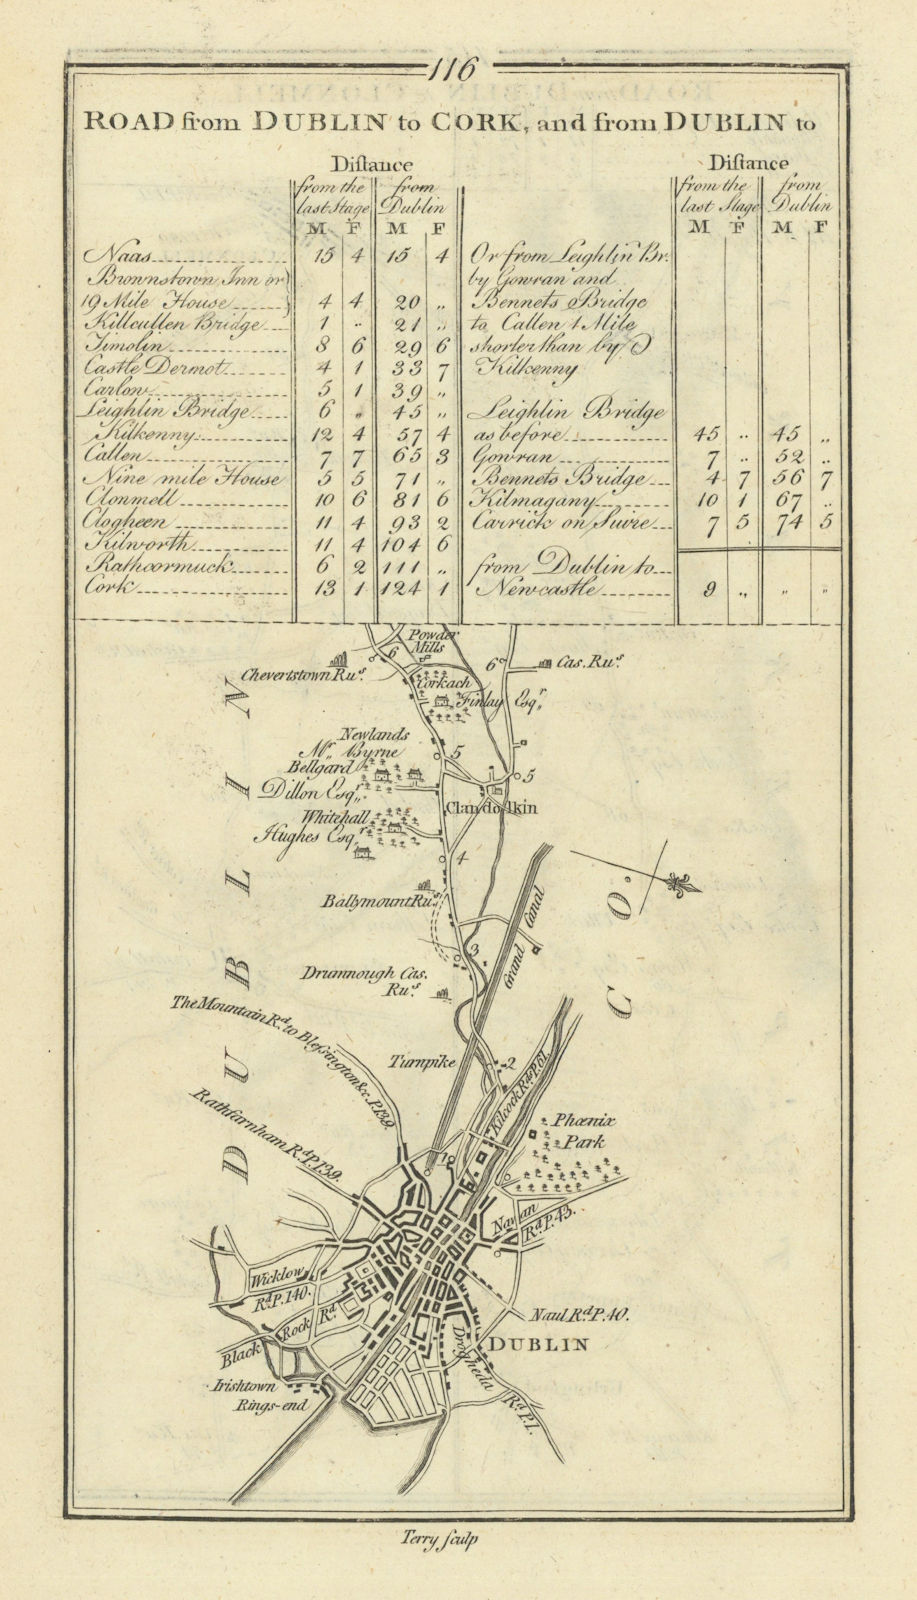 Associate Product #116 Road from Dublin to Cork. Clondalkin. TAYLOR/SKINNER 1778 old antique map